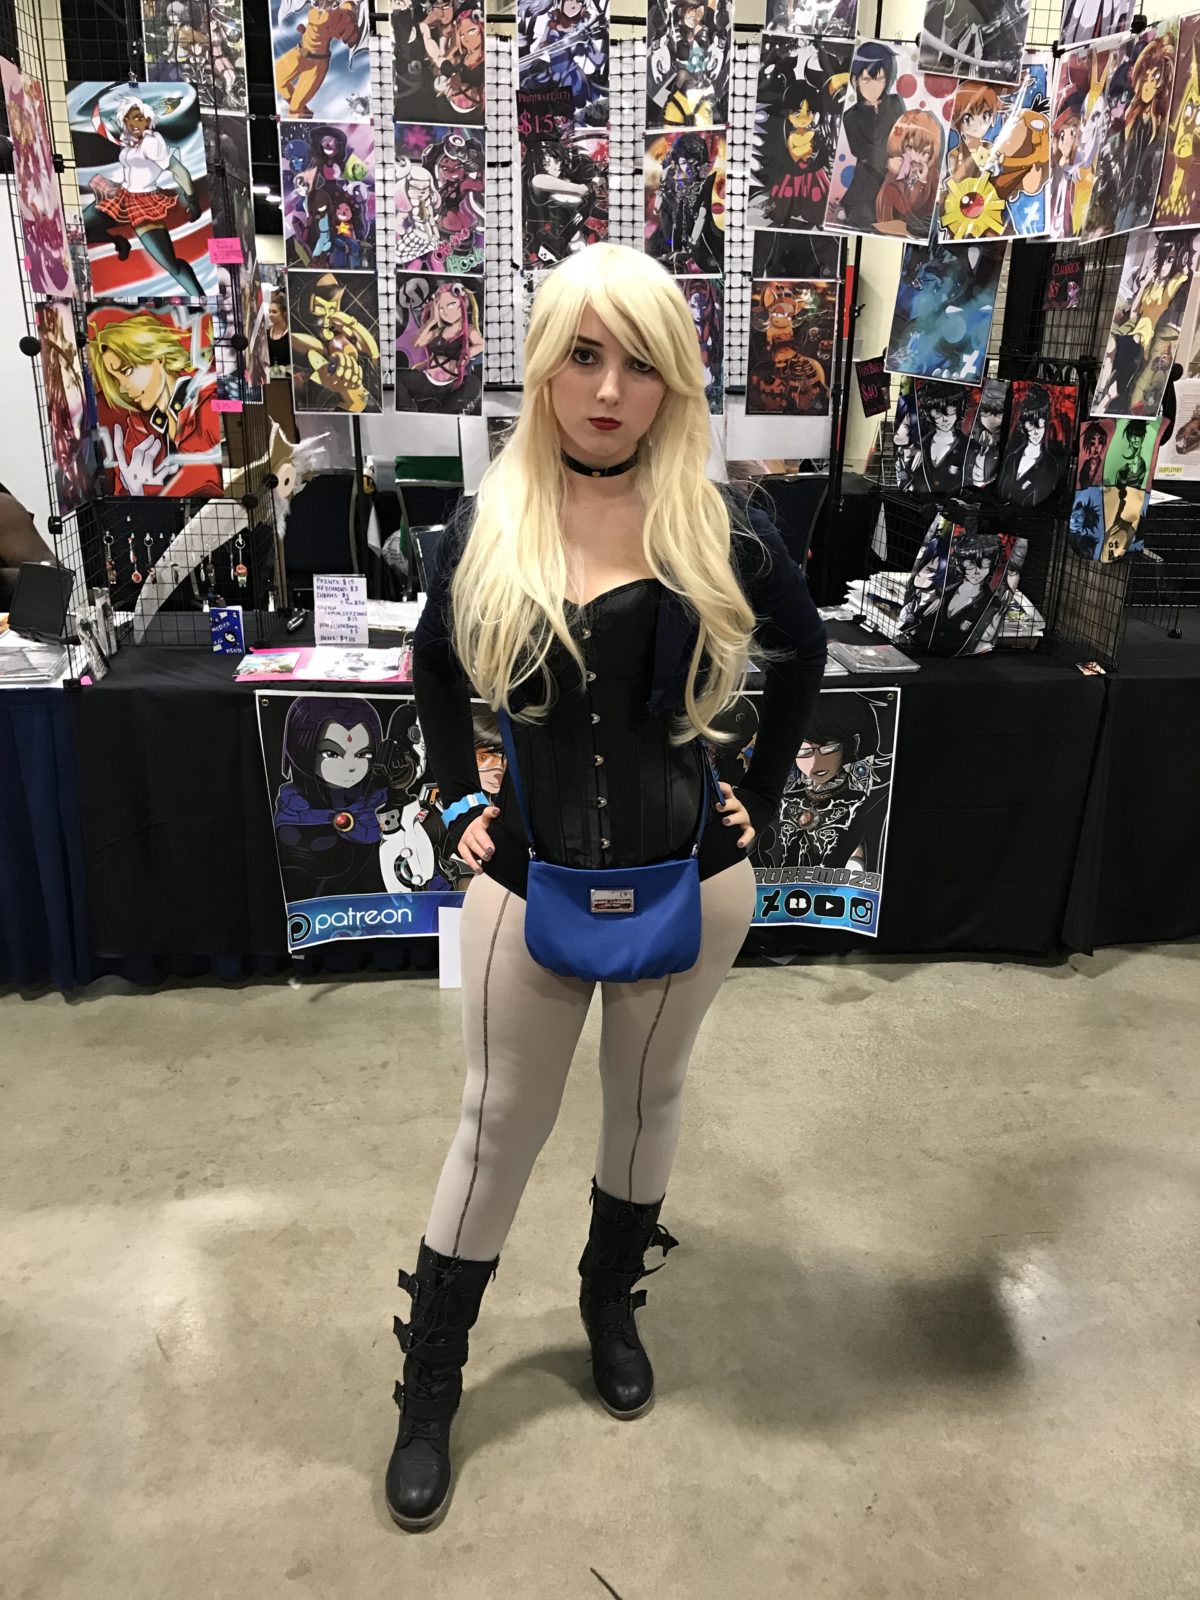 SUPER CosViews from Fort Lauderdale SUPERCON:   A Canary Cry was heard